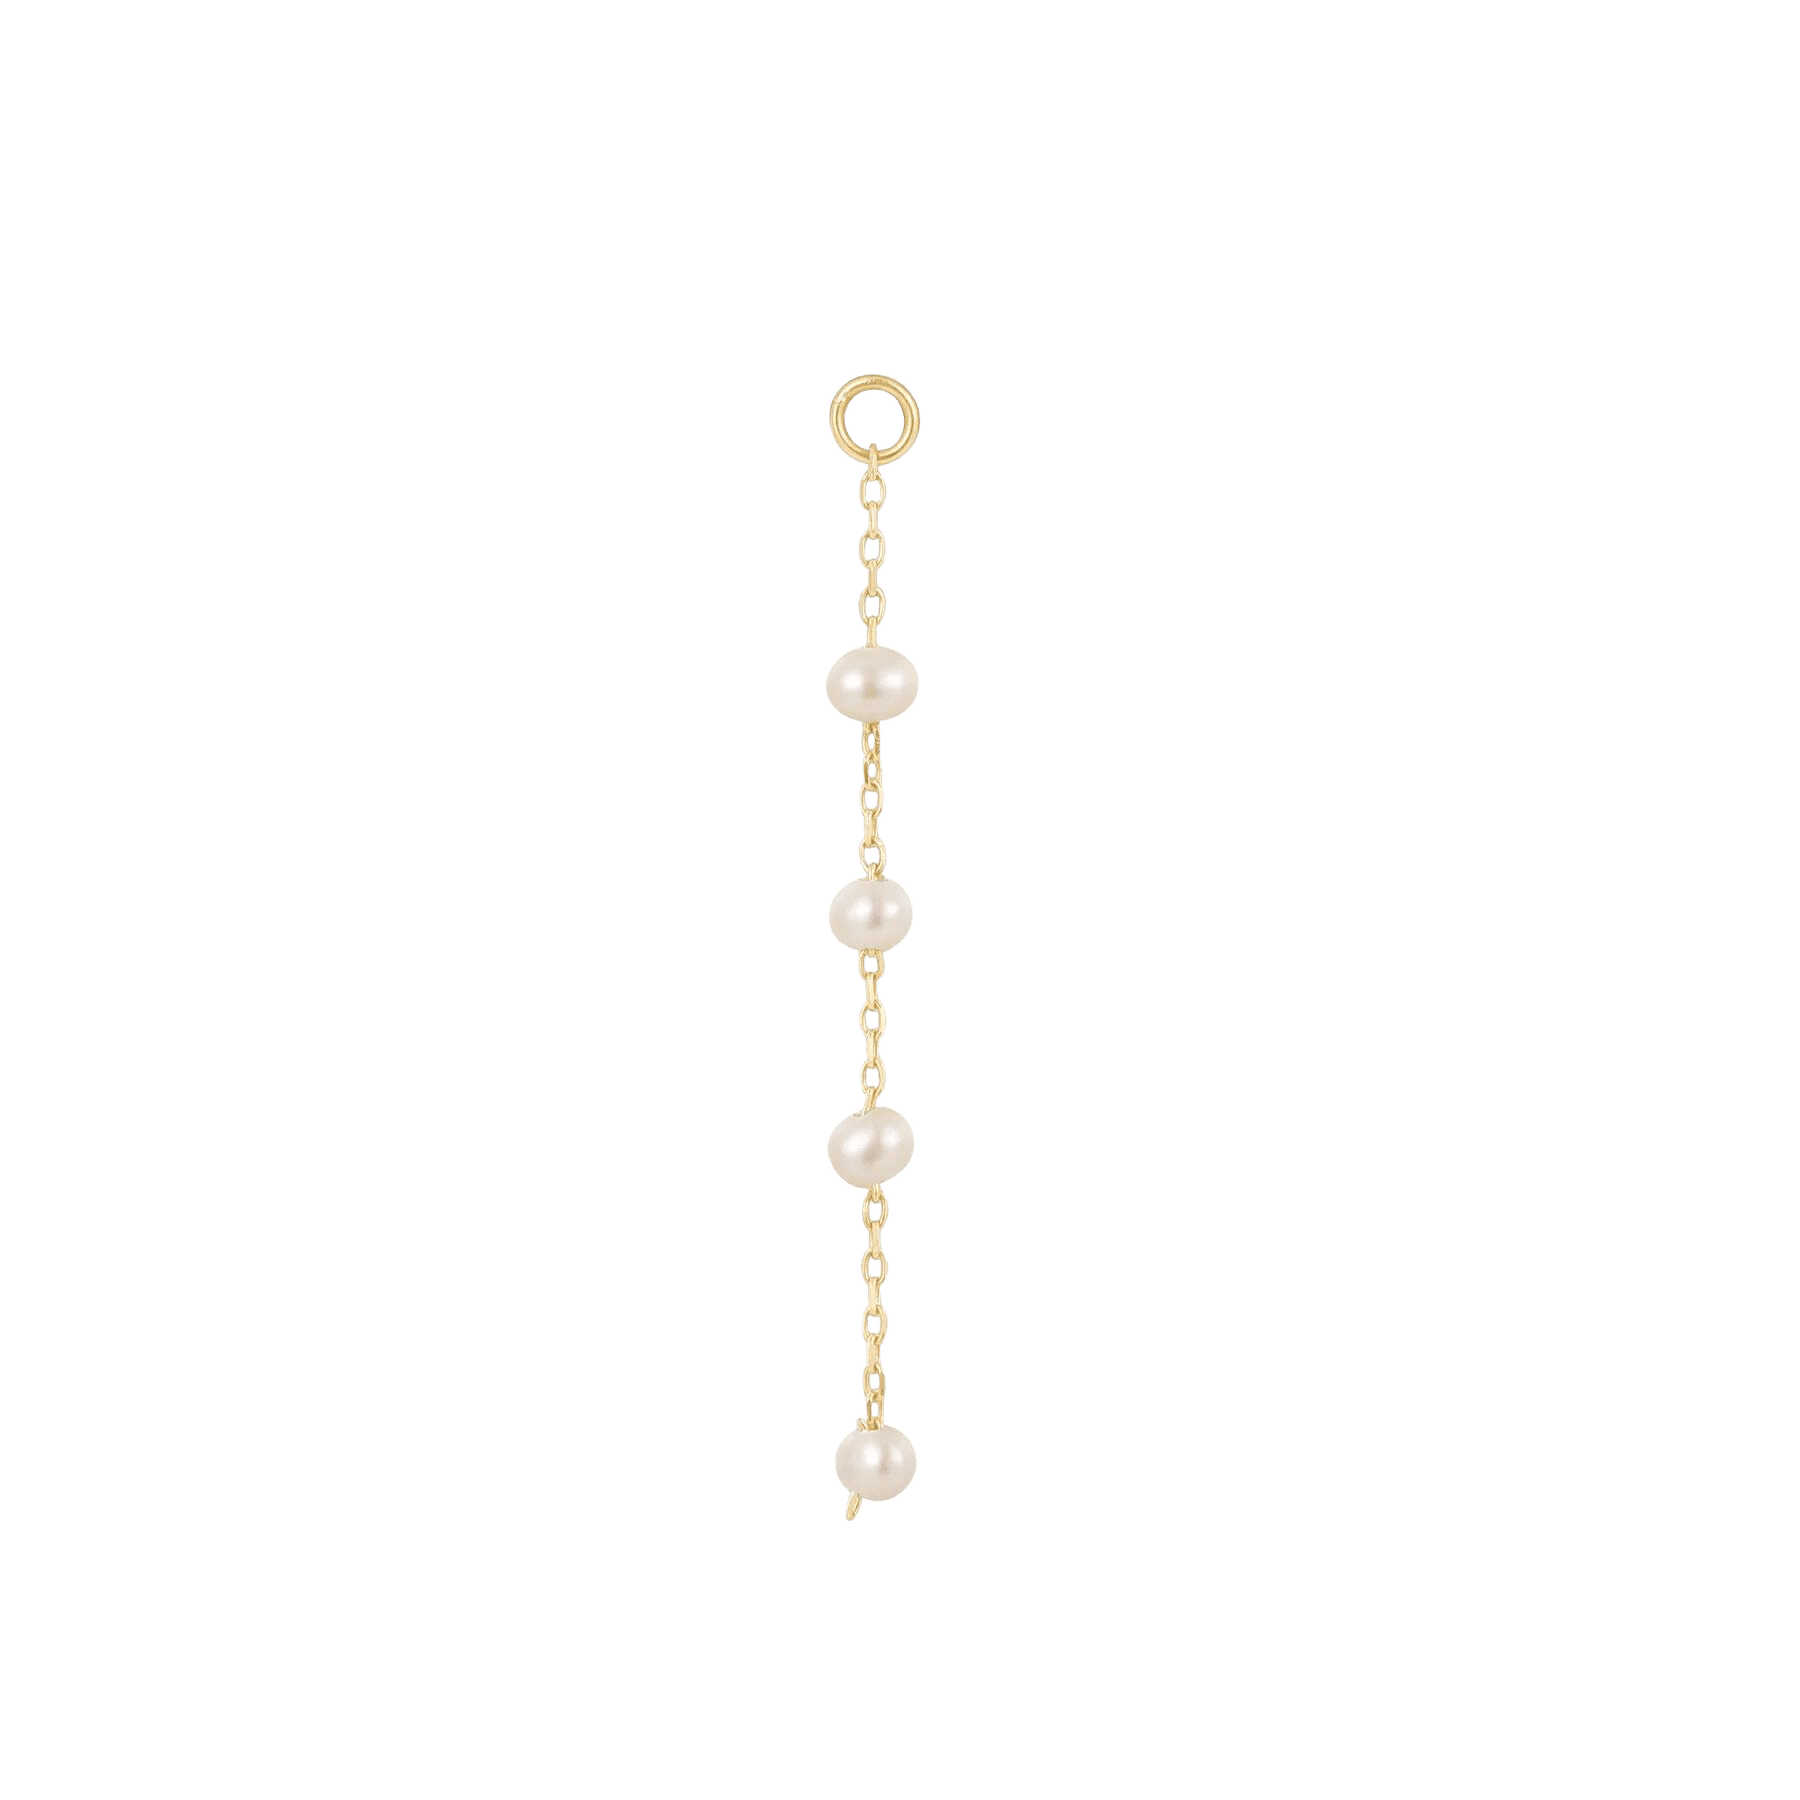 4 BEAD PEARL CHARM - SOLID 14KT GOLD